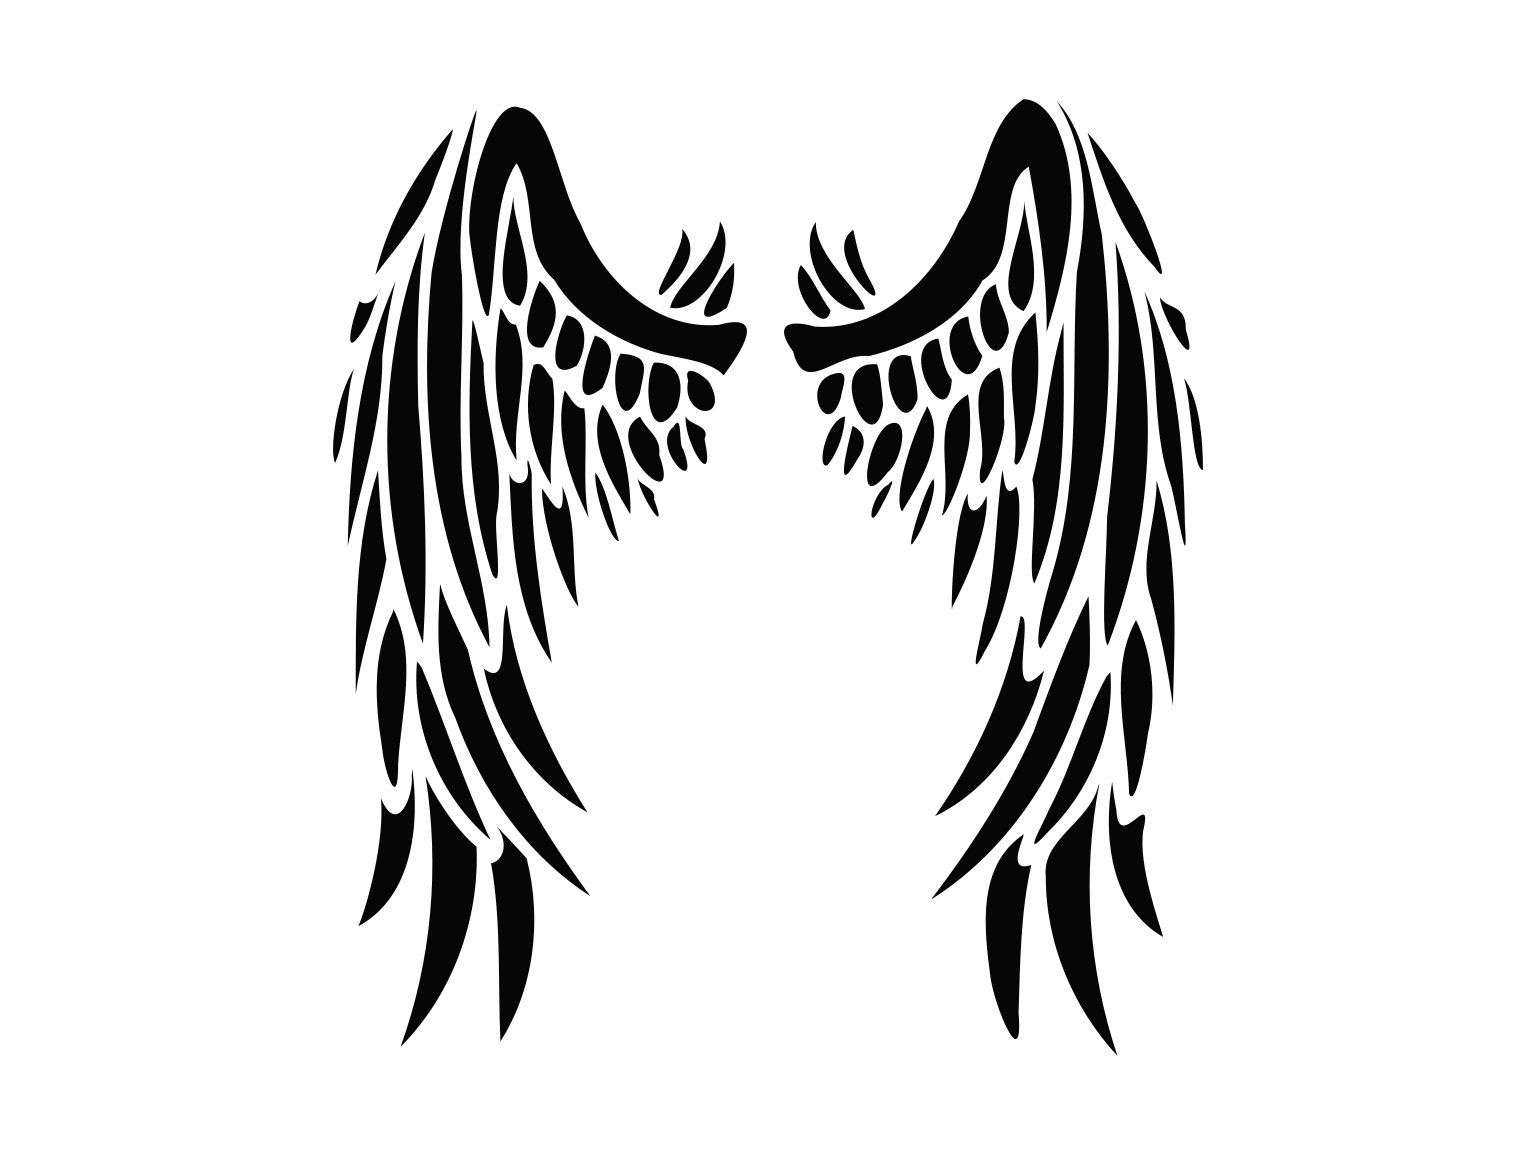 Wings Black Royalty Free SVG, Cliparts, Vectors, and Stock Illustration.  Image 13777239.